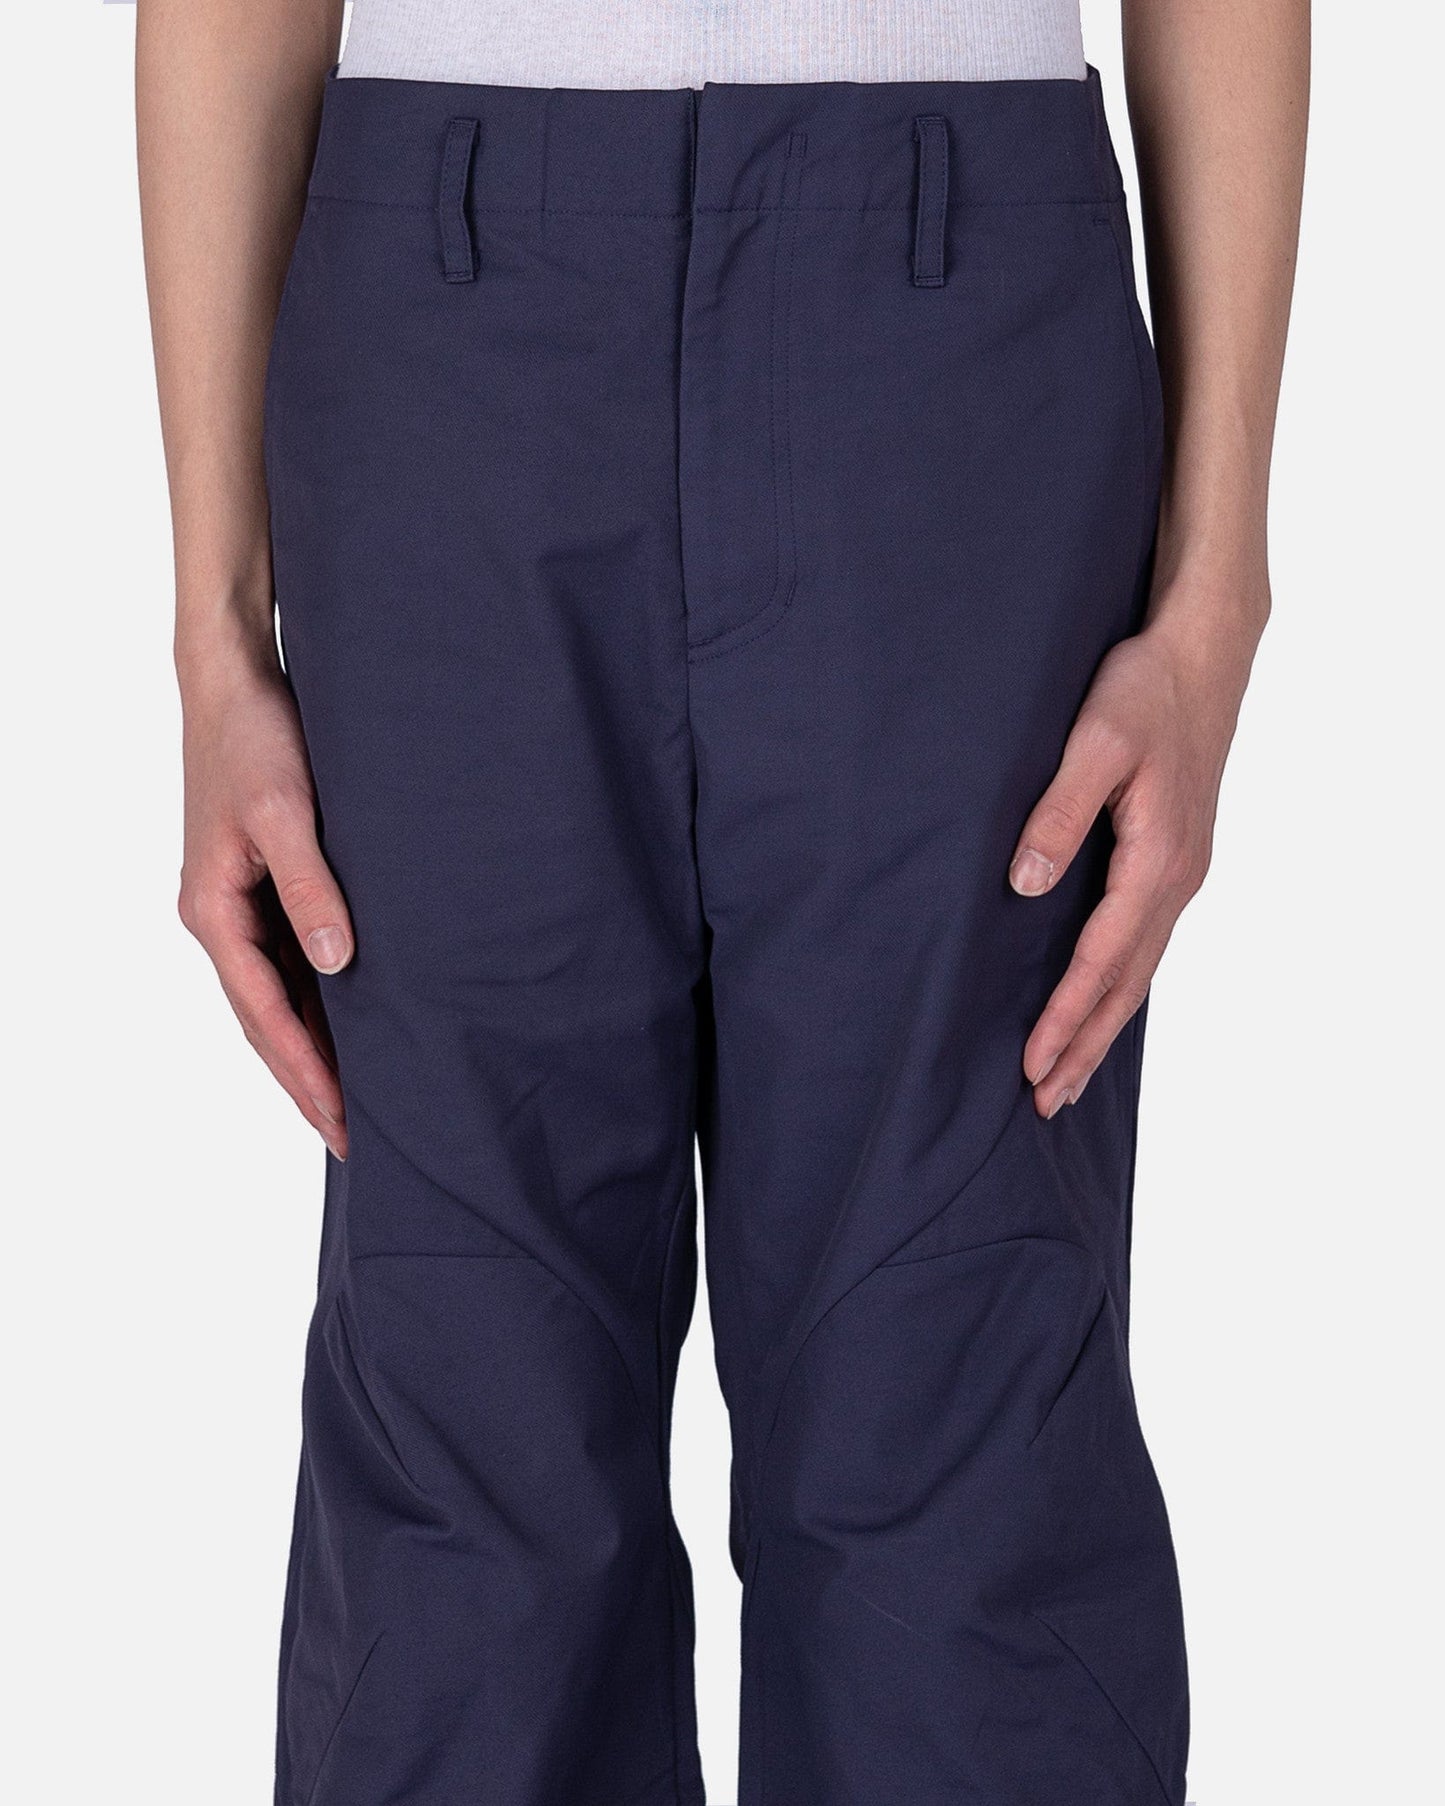 POST ARCHIVE FACTION (P.A.F) Men's Pants 5.0 Trousers Right in Purple